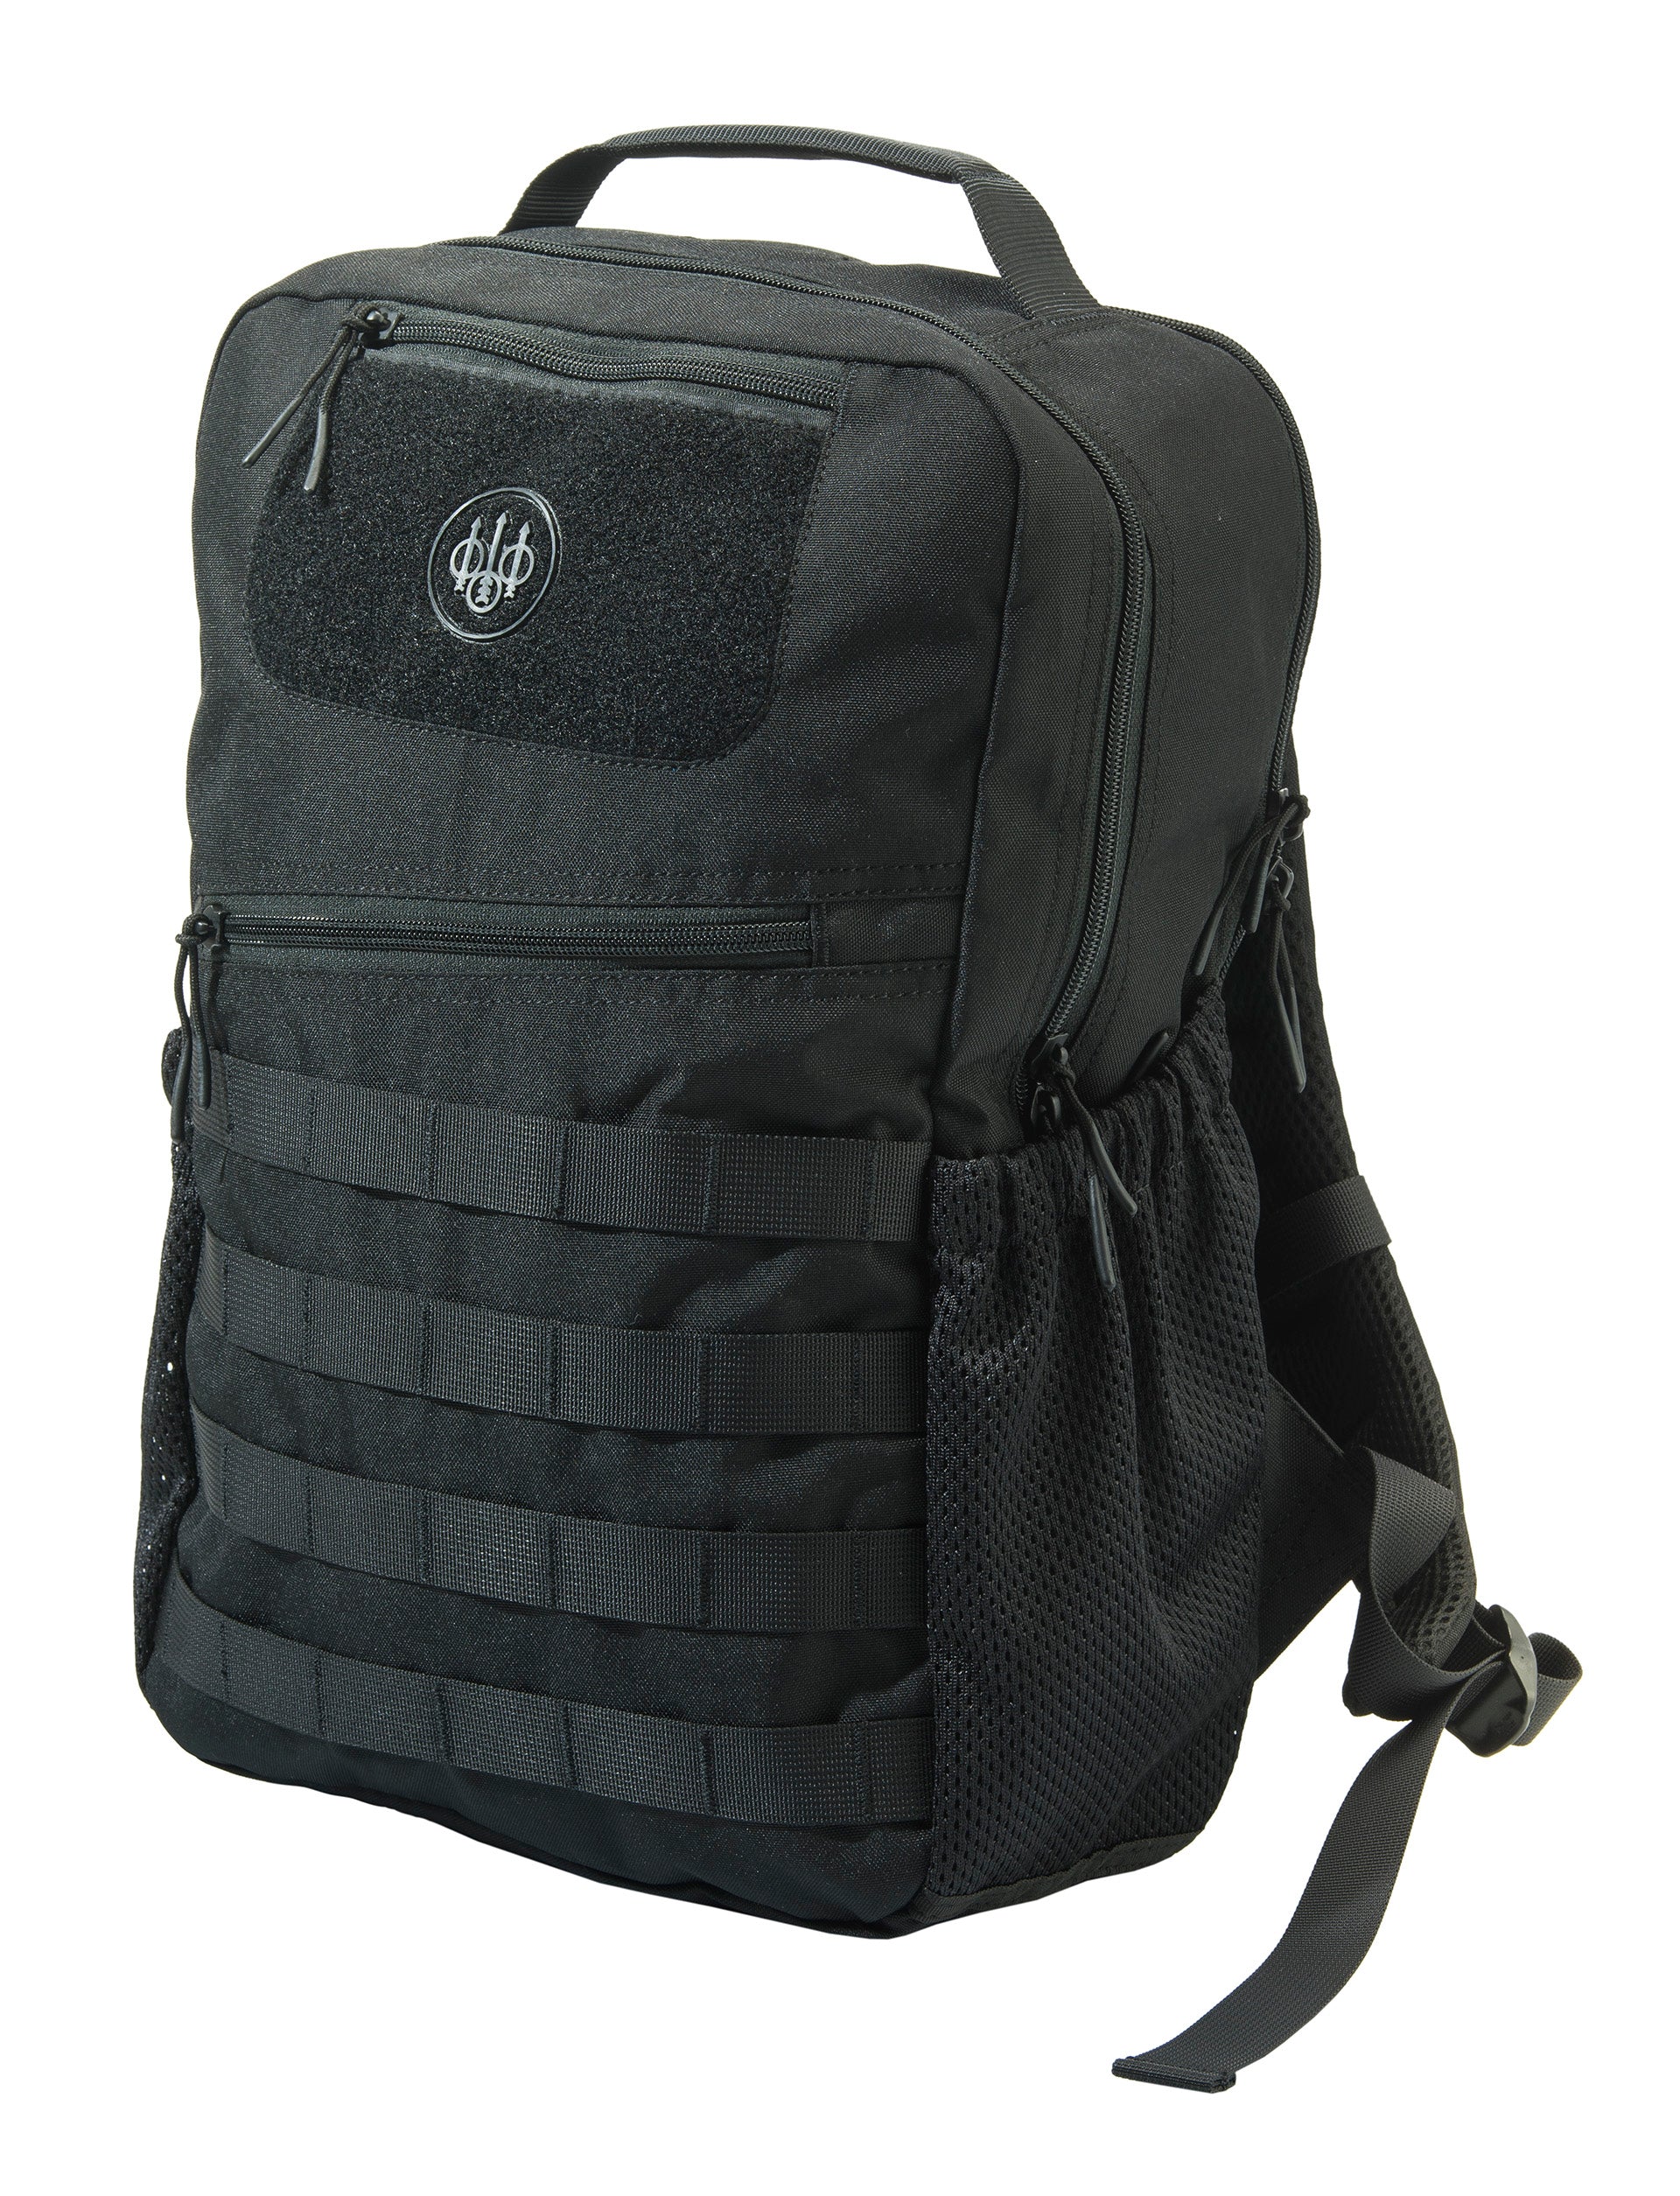 Flank 17L Tactical Backpack